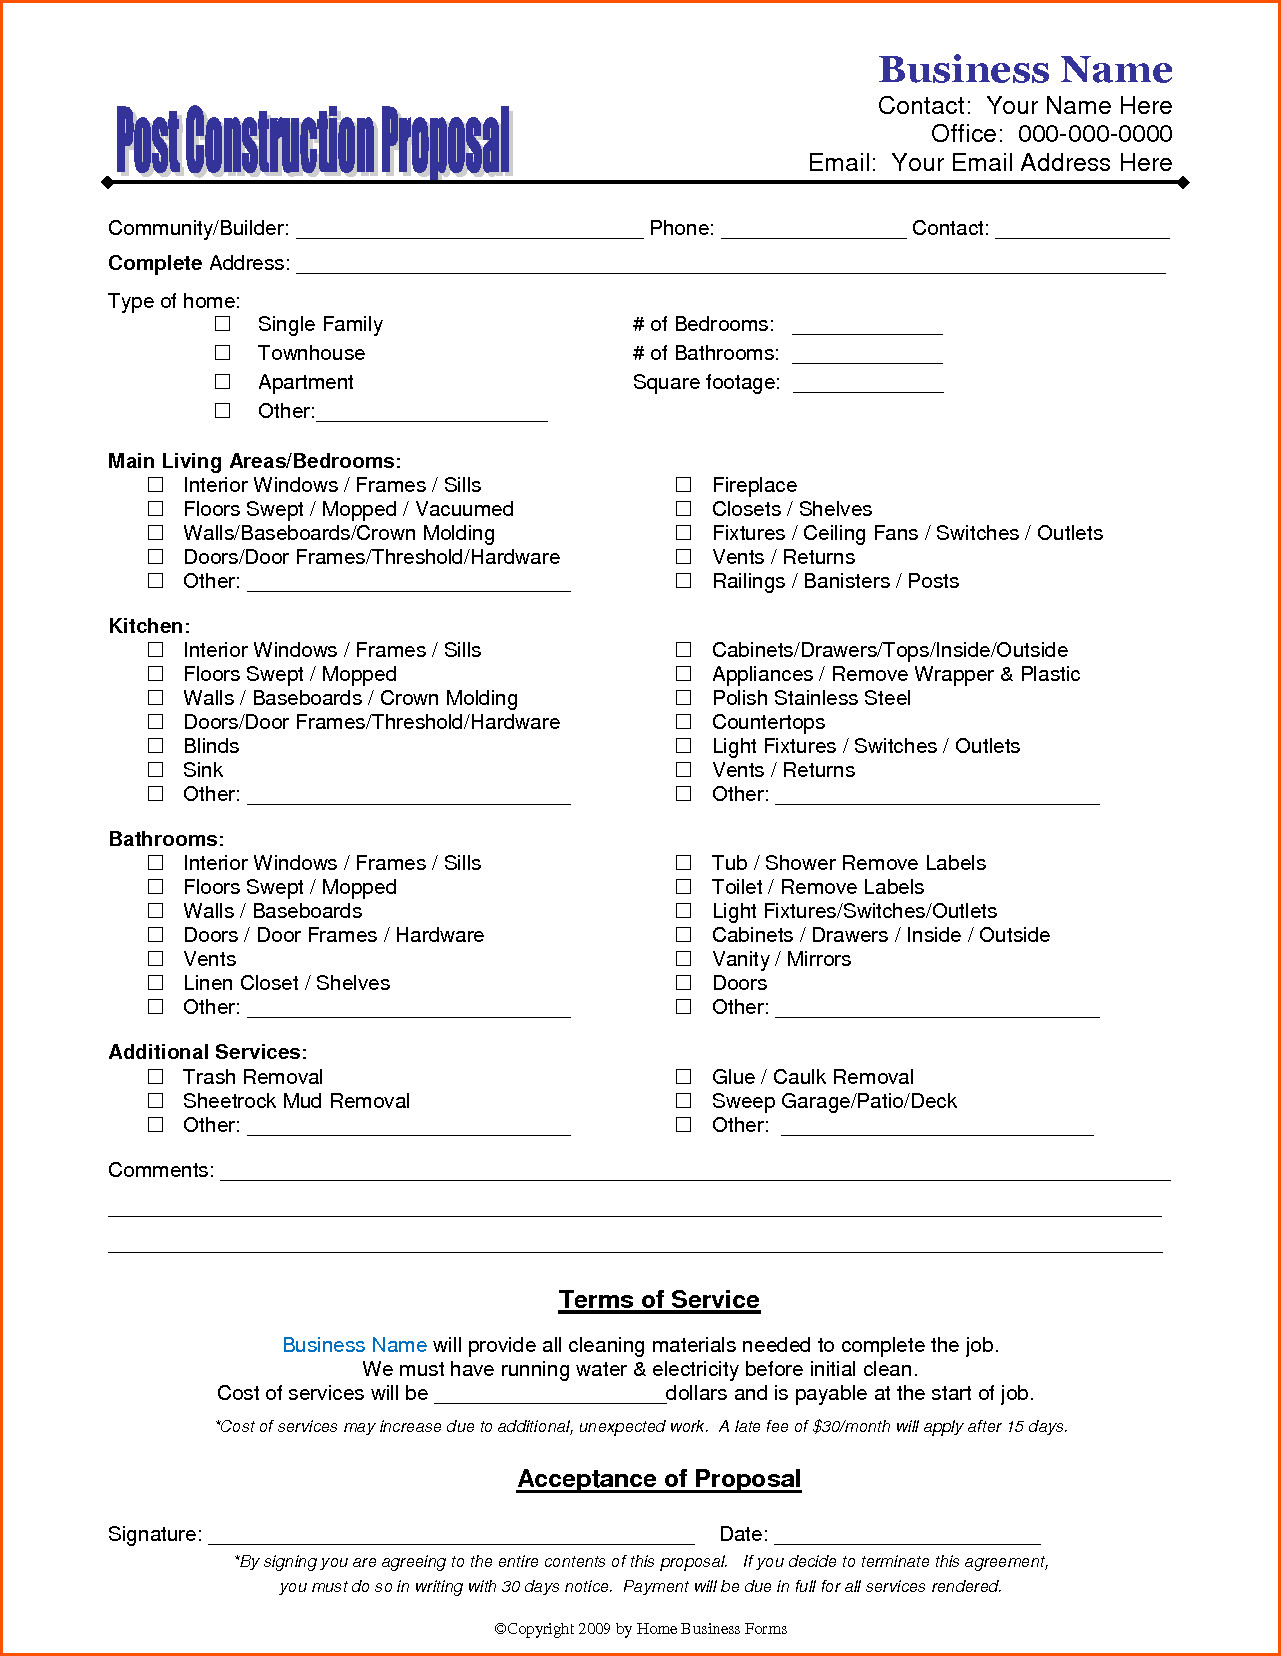 Post Construction Cleaning Proposal Template Construction Proposal Template